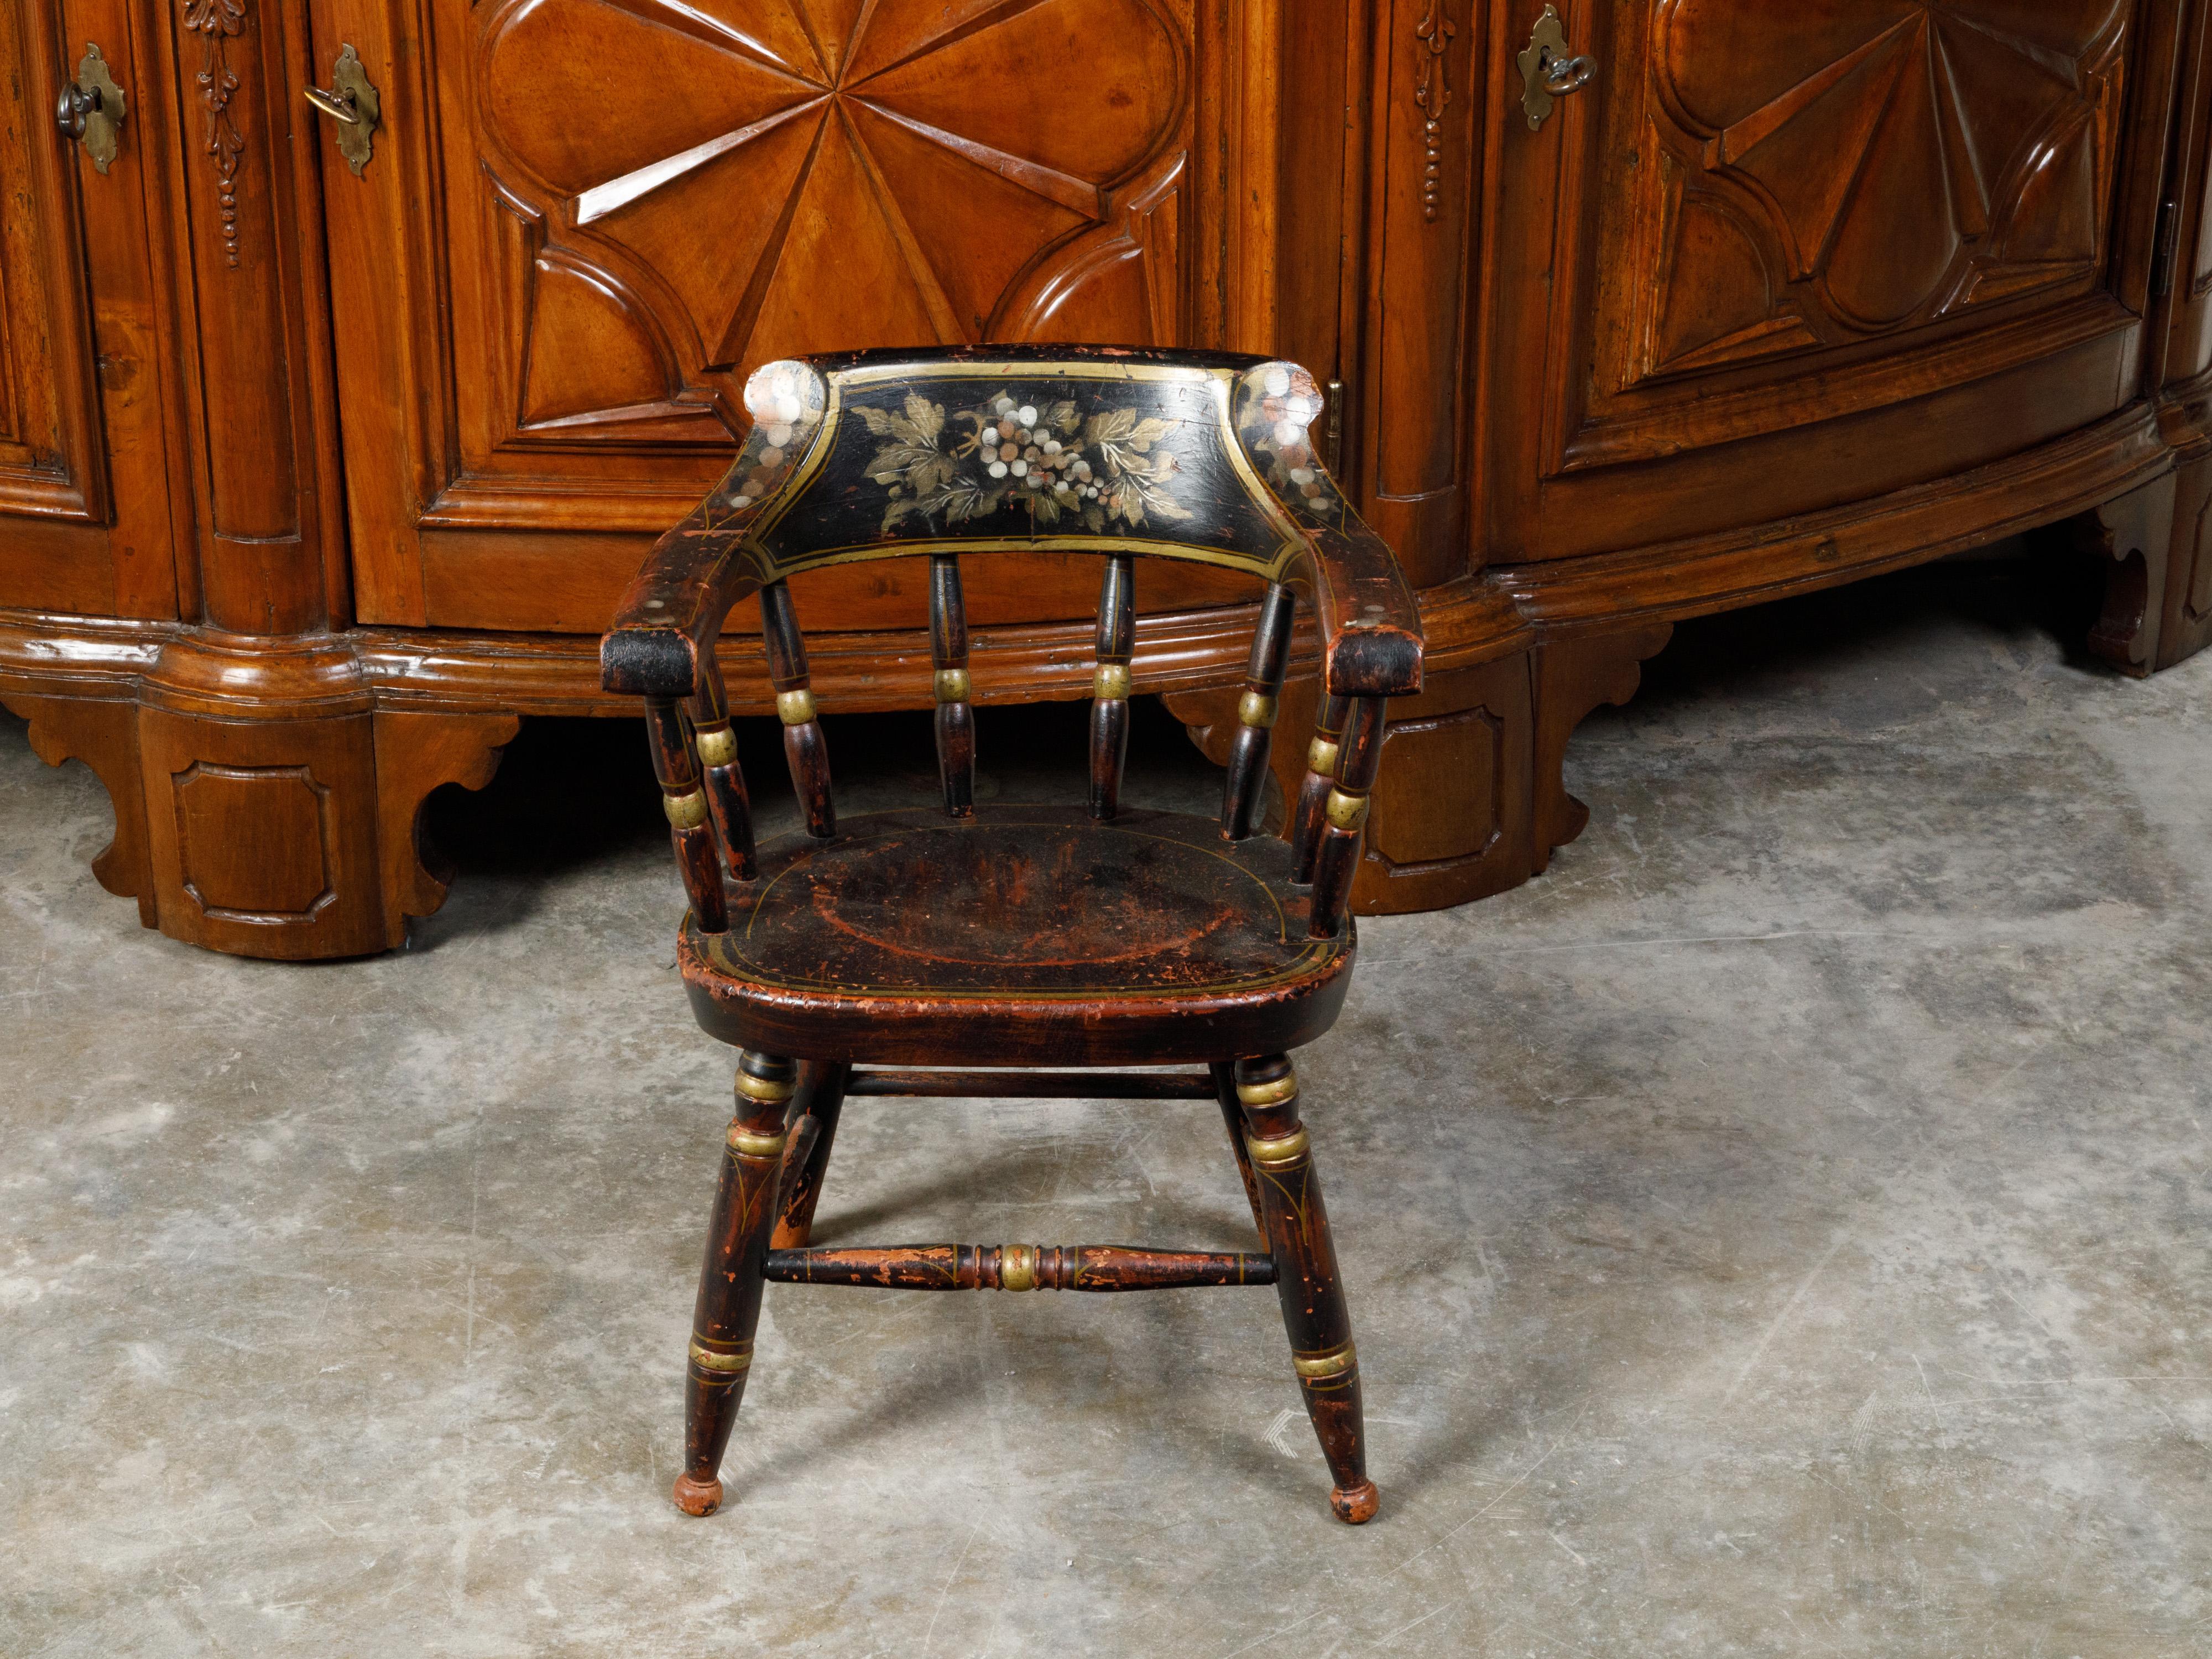 An American Lambert Hitchcock's child's chair from the 19th century, with black and gold finish and grape motifs. Created by American furniture manufacturer Lambert Hitchcock during the 19th century, this child's chair attracts our attention with